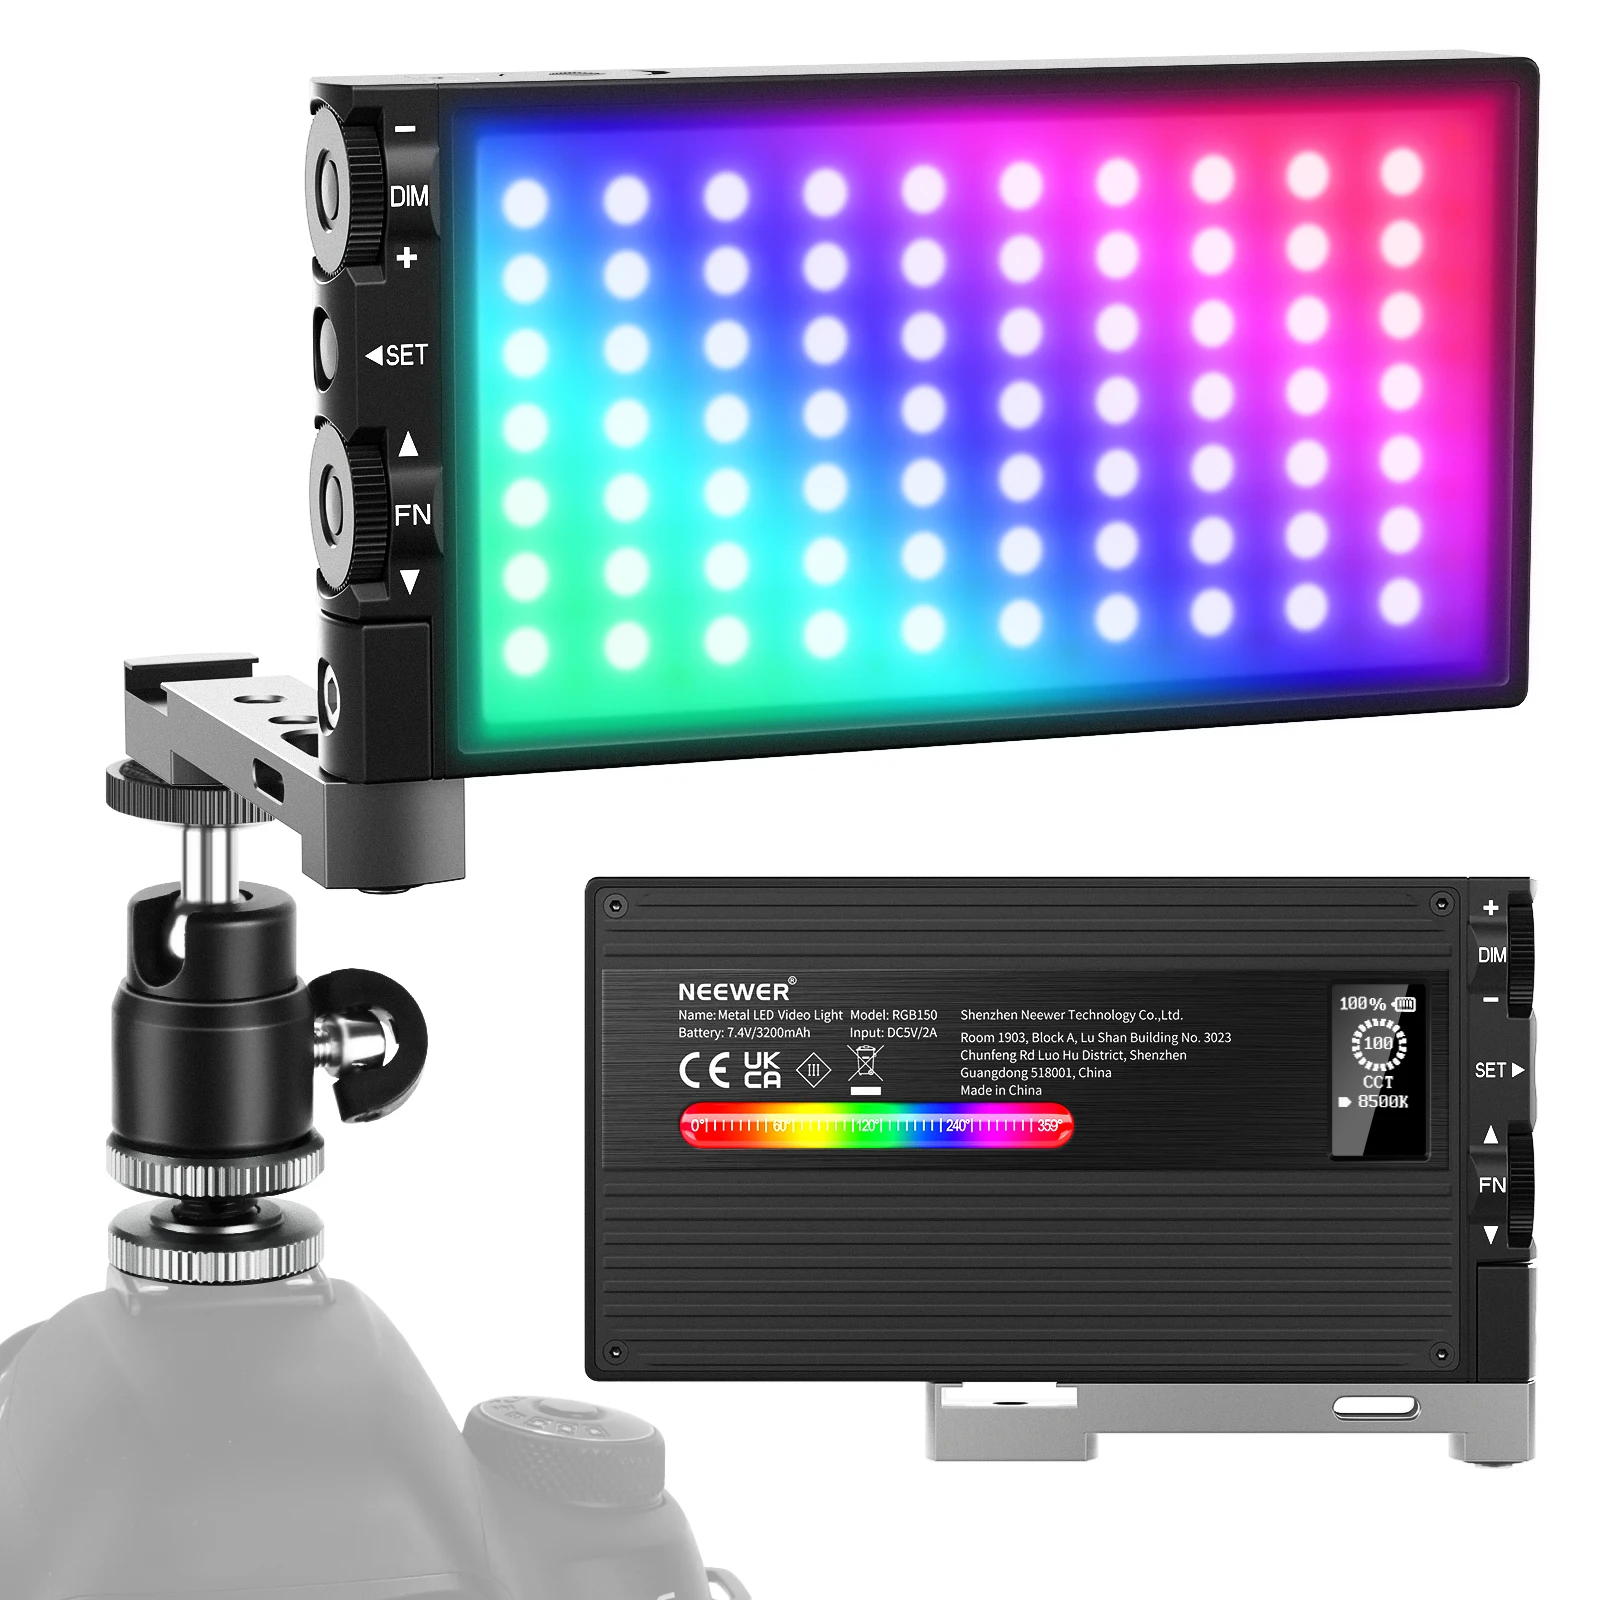 

Neewer RGB LED Video Light, 12W RGB150 Full-Color Camera Light with Aluminum Alloy Body, CRI 97+, TLCI 97+ for Gaming/YouTube